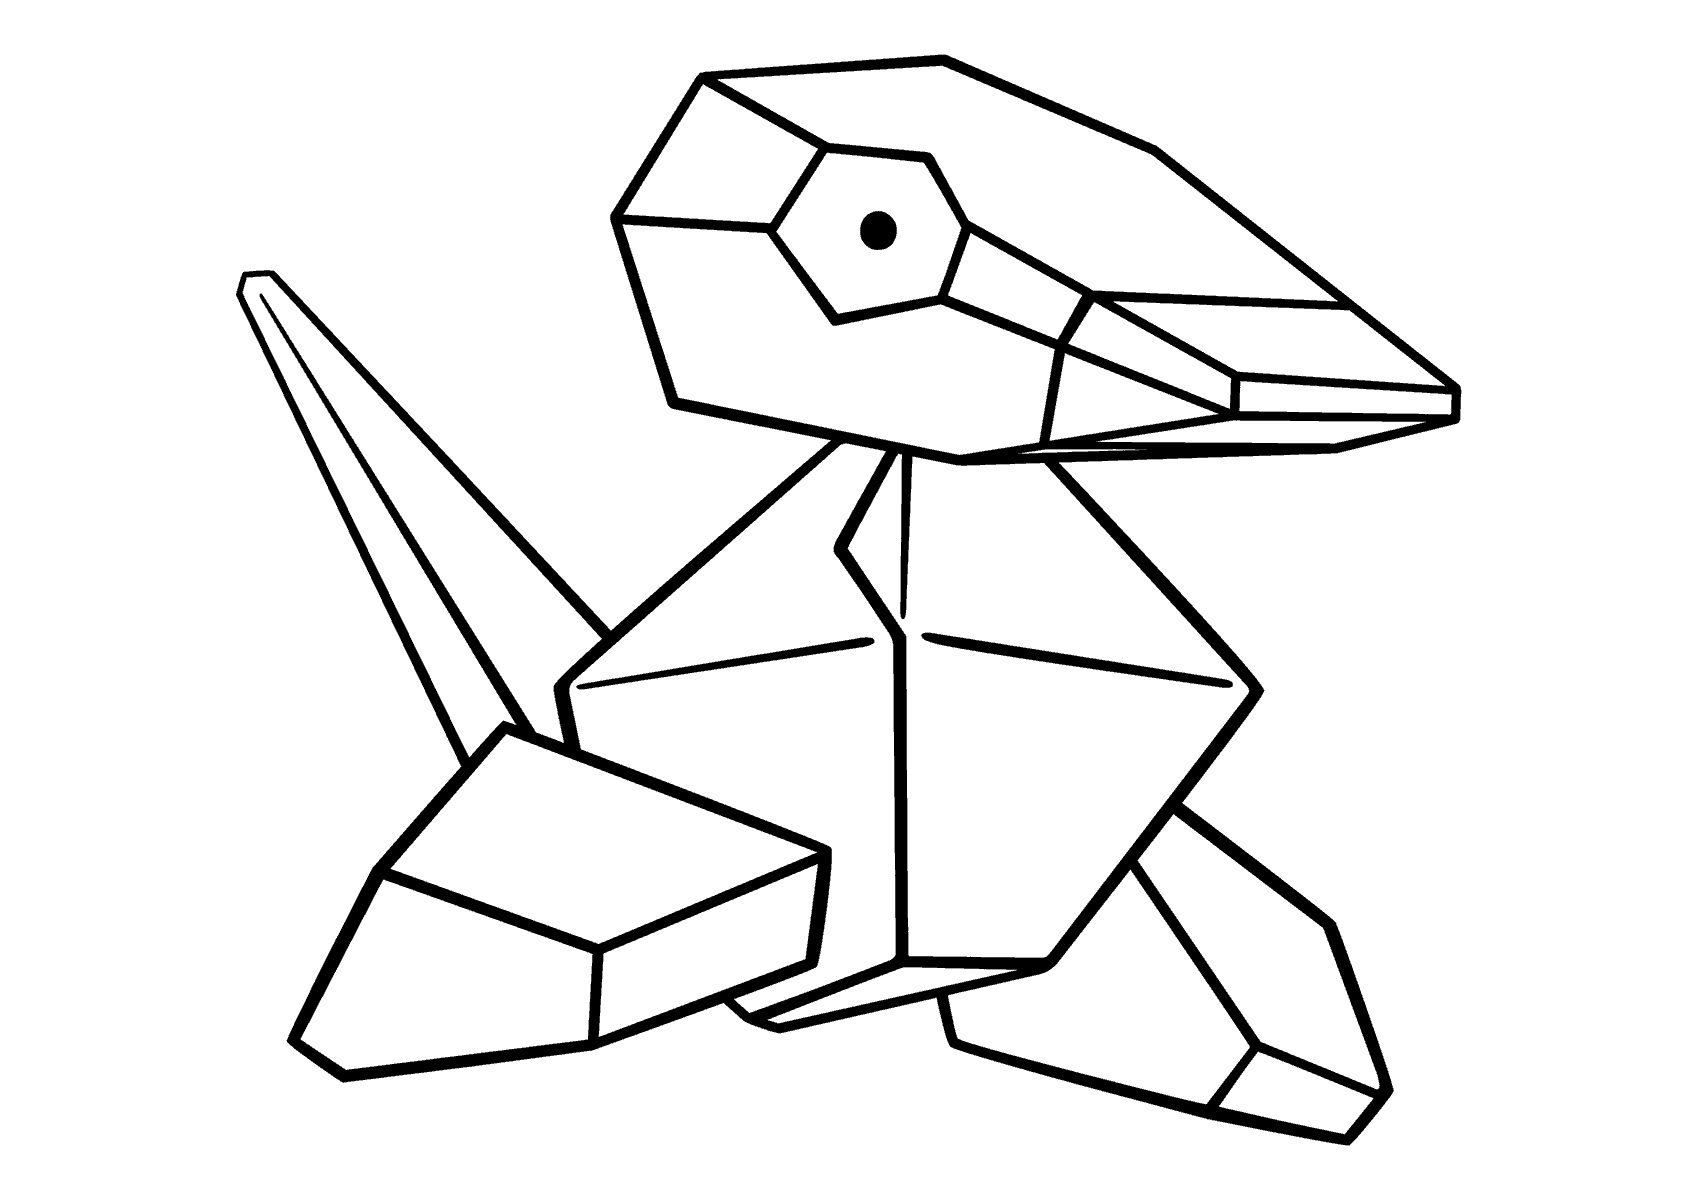 coloring page: Porygon is a unique Pokémon made of code- able to enter cyberspace & revert itself entirely back to data. Green, oval body with a pink lower half, blue head & red eyes, its arms & legs are pink with black pads.